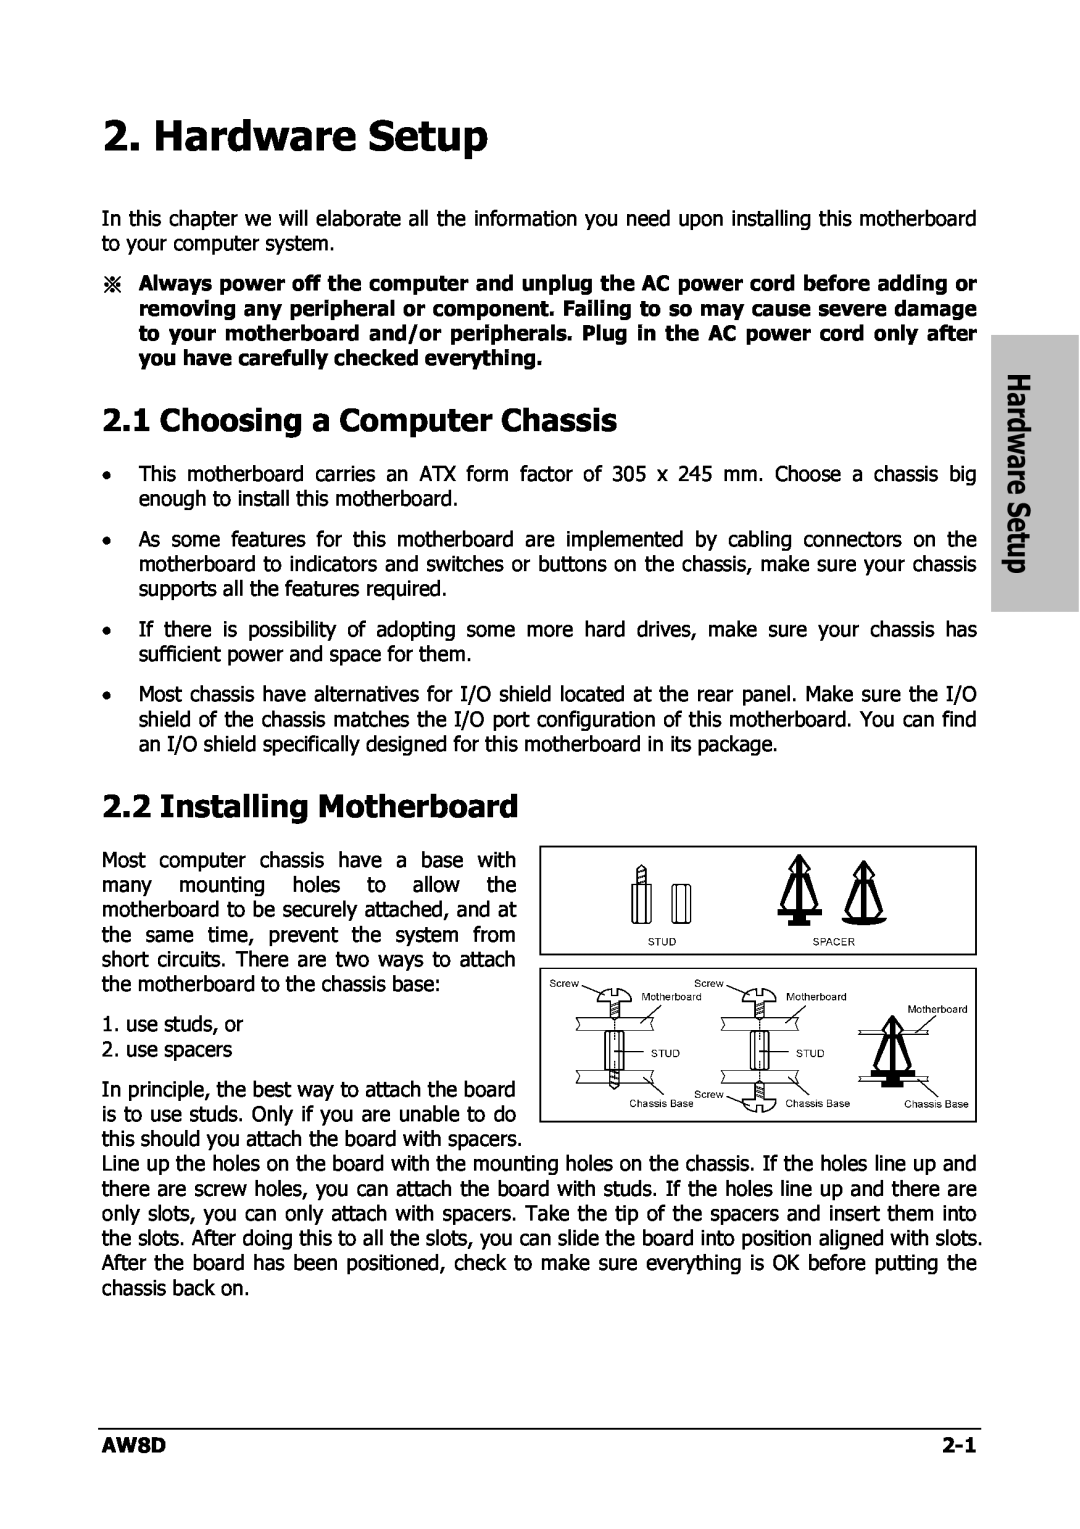 Intel AW8D user manual Hardware Setup, Choosing a Computer Chassis, Installing Motherboard 